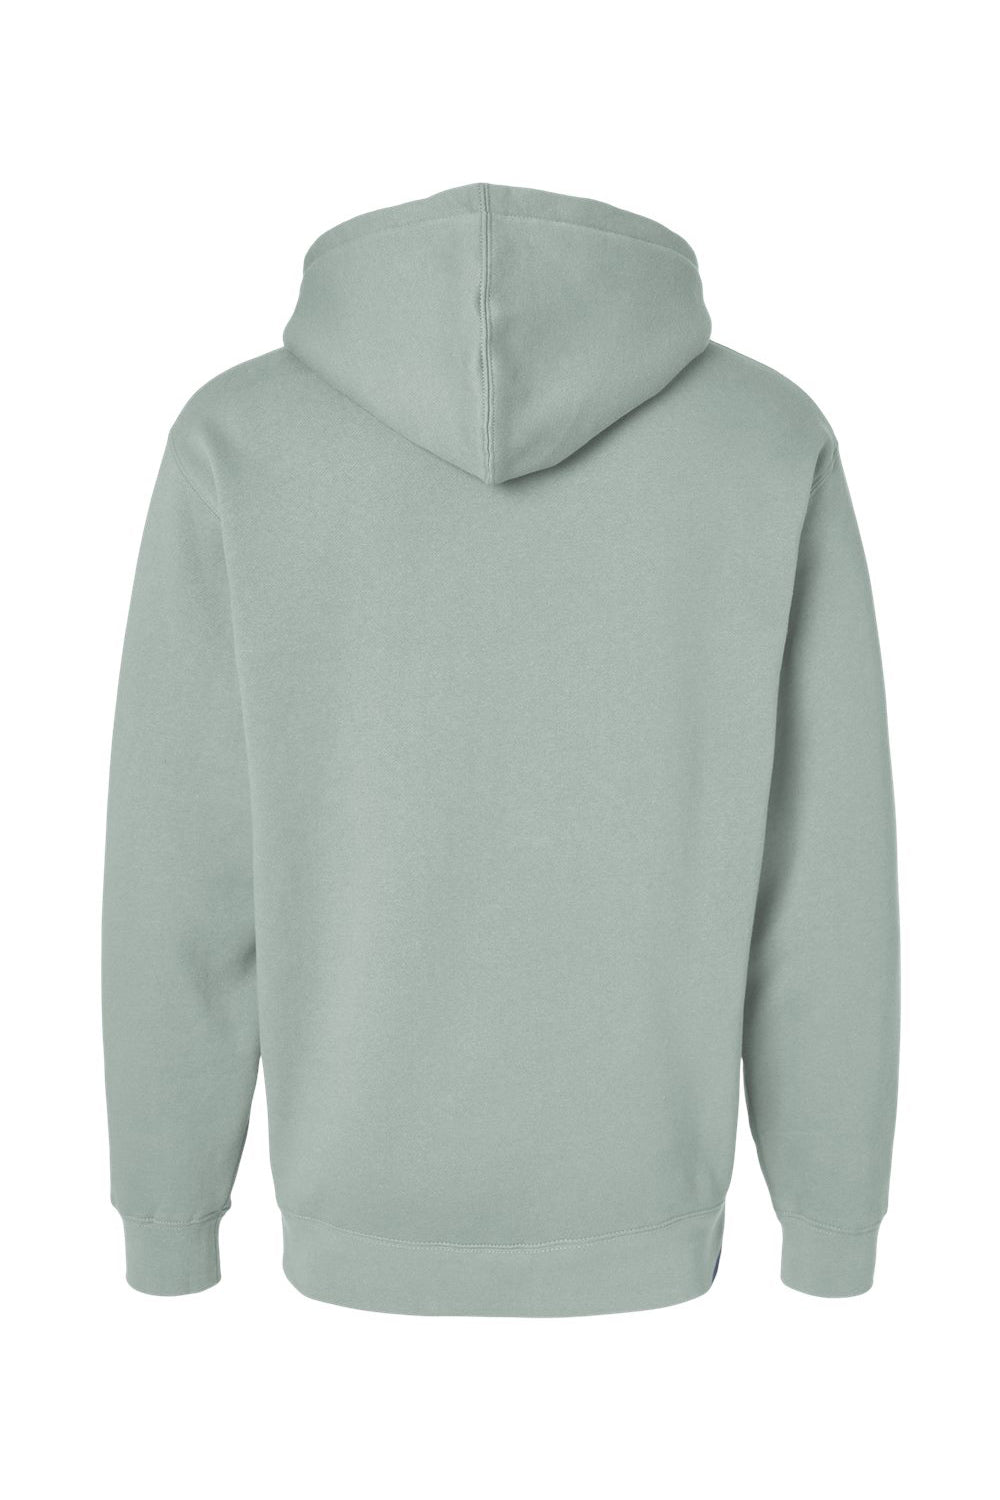 Independent Trading Co. IND4000 Mens Hooded Sweatshirt Hoodie Dusty Sage Green Flat Back